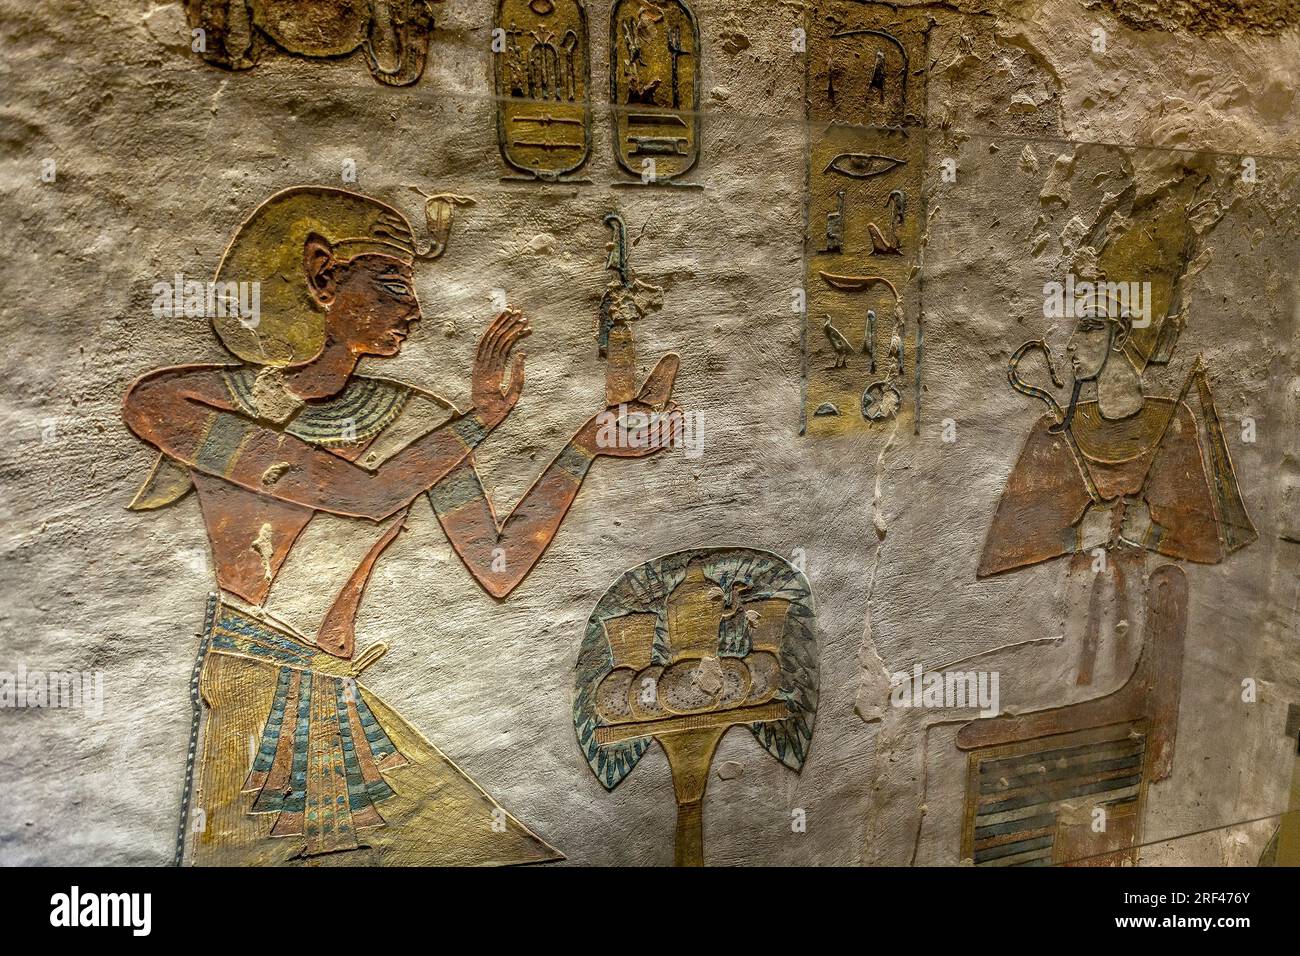 Ramesses III making offerings to Osiris in the tomb of Ramesses III, KV11, the Valley of the Kings Stock Photo